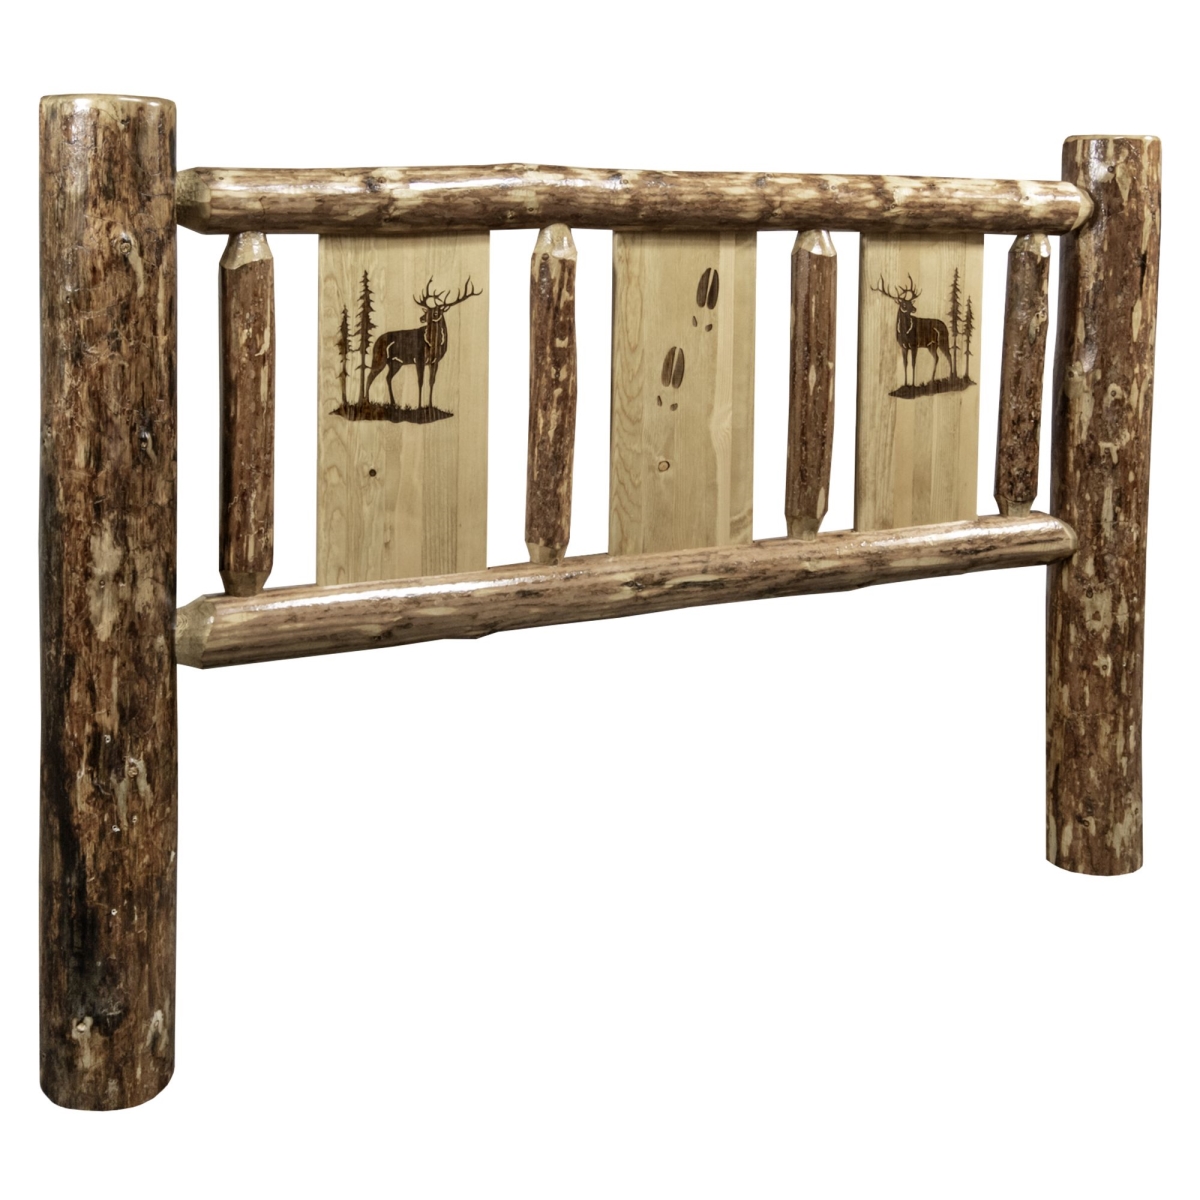 D2D Technologies Glacier Country Headboard with Laser Engraved Elk Design - Twin Size